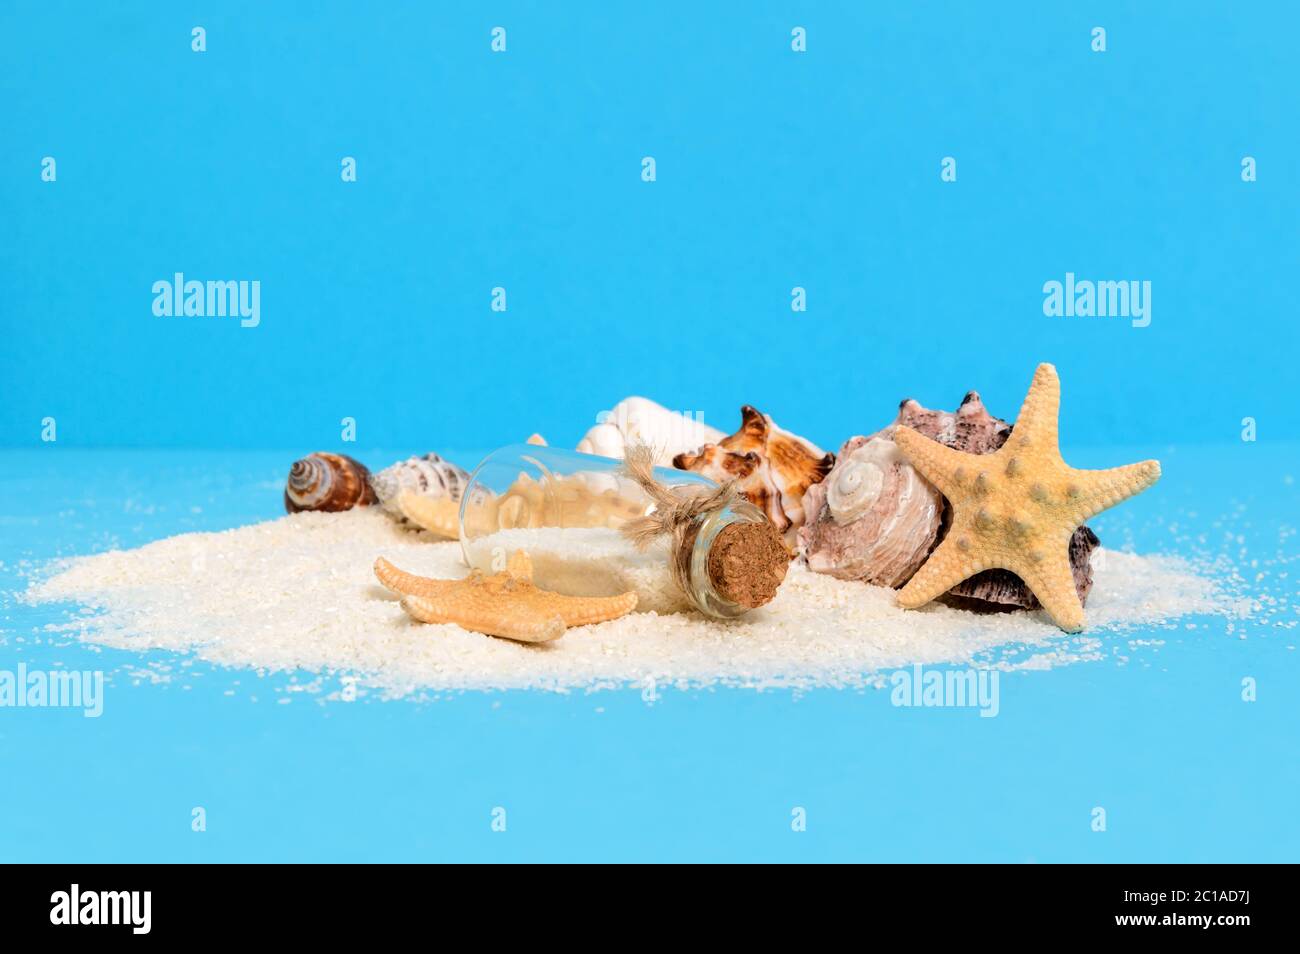 Small treasure island: desolate white sand shore with message bottle, sea stars or starfish and shells. Summer travel, adventure or exploration concep Stock Photo